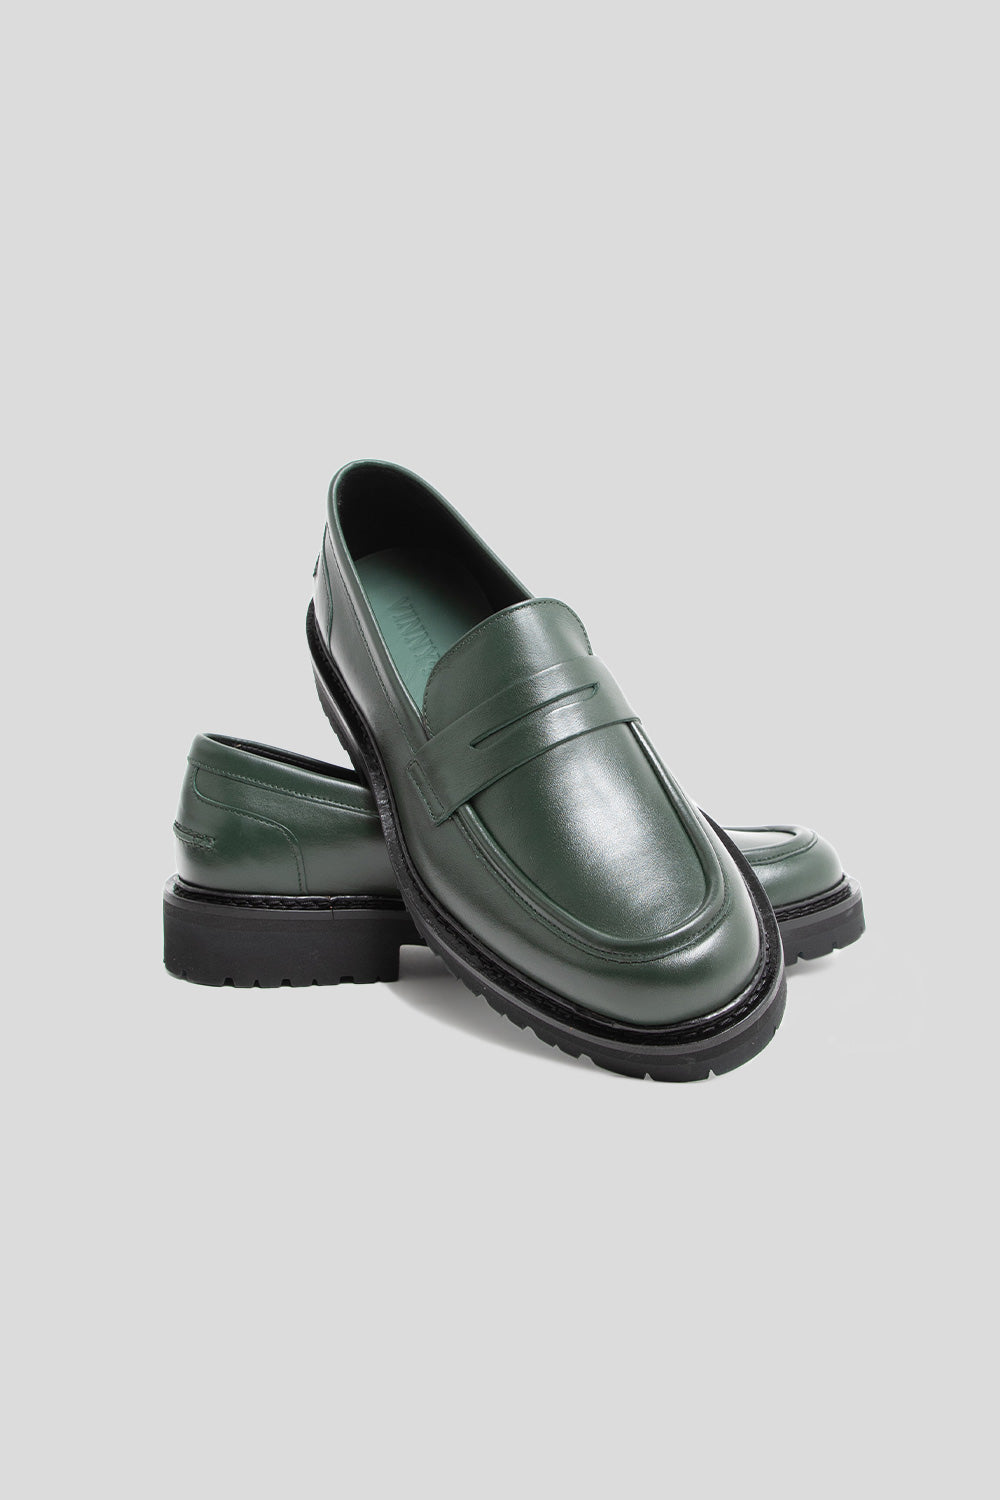 Vinny's Richee Penny Loafer in Basil Green